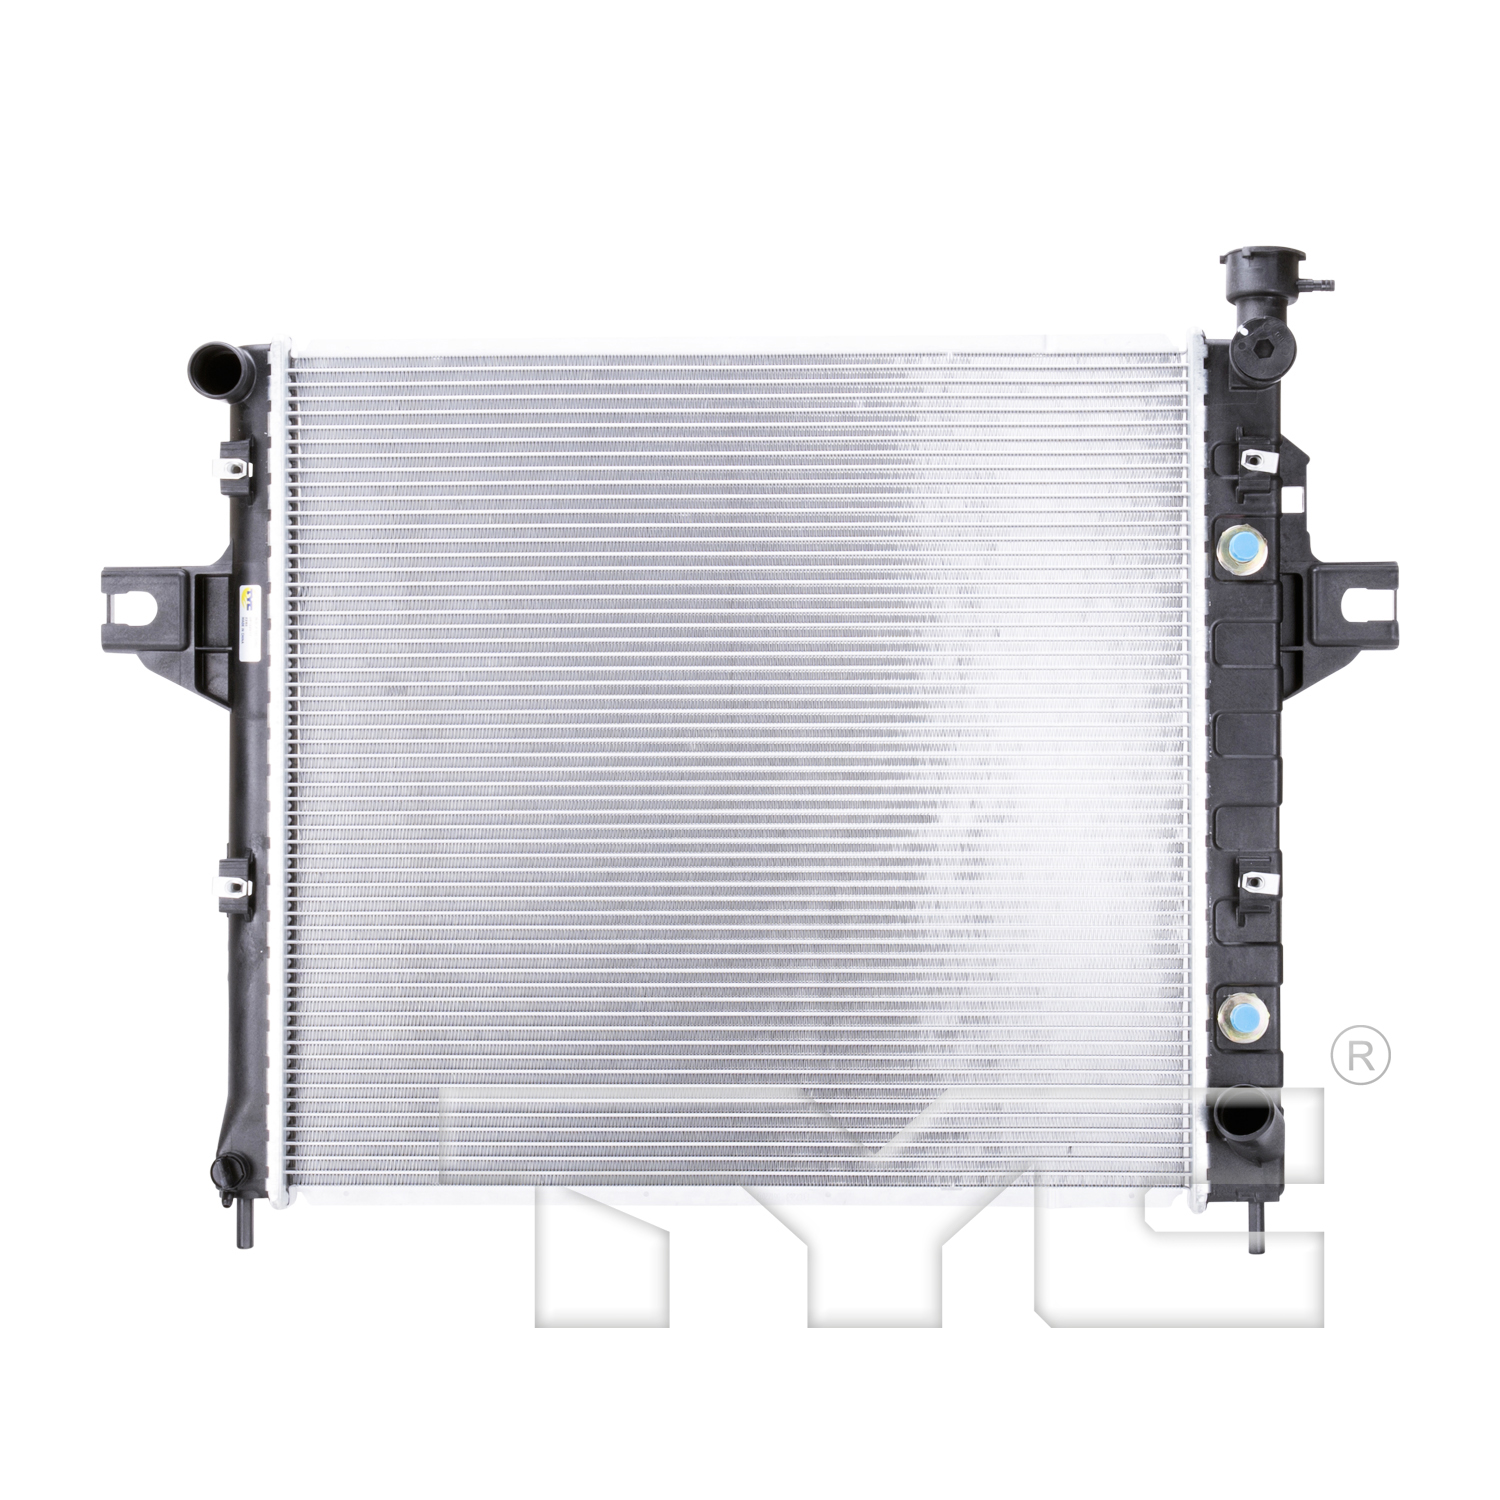 Aftermarket RADIATORS for JEEP - GRAND CHEROKEE, GRAND CHEROKEE,99-00,Radiator assembly